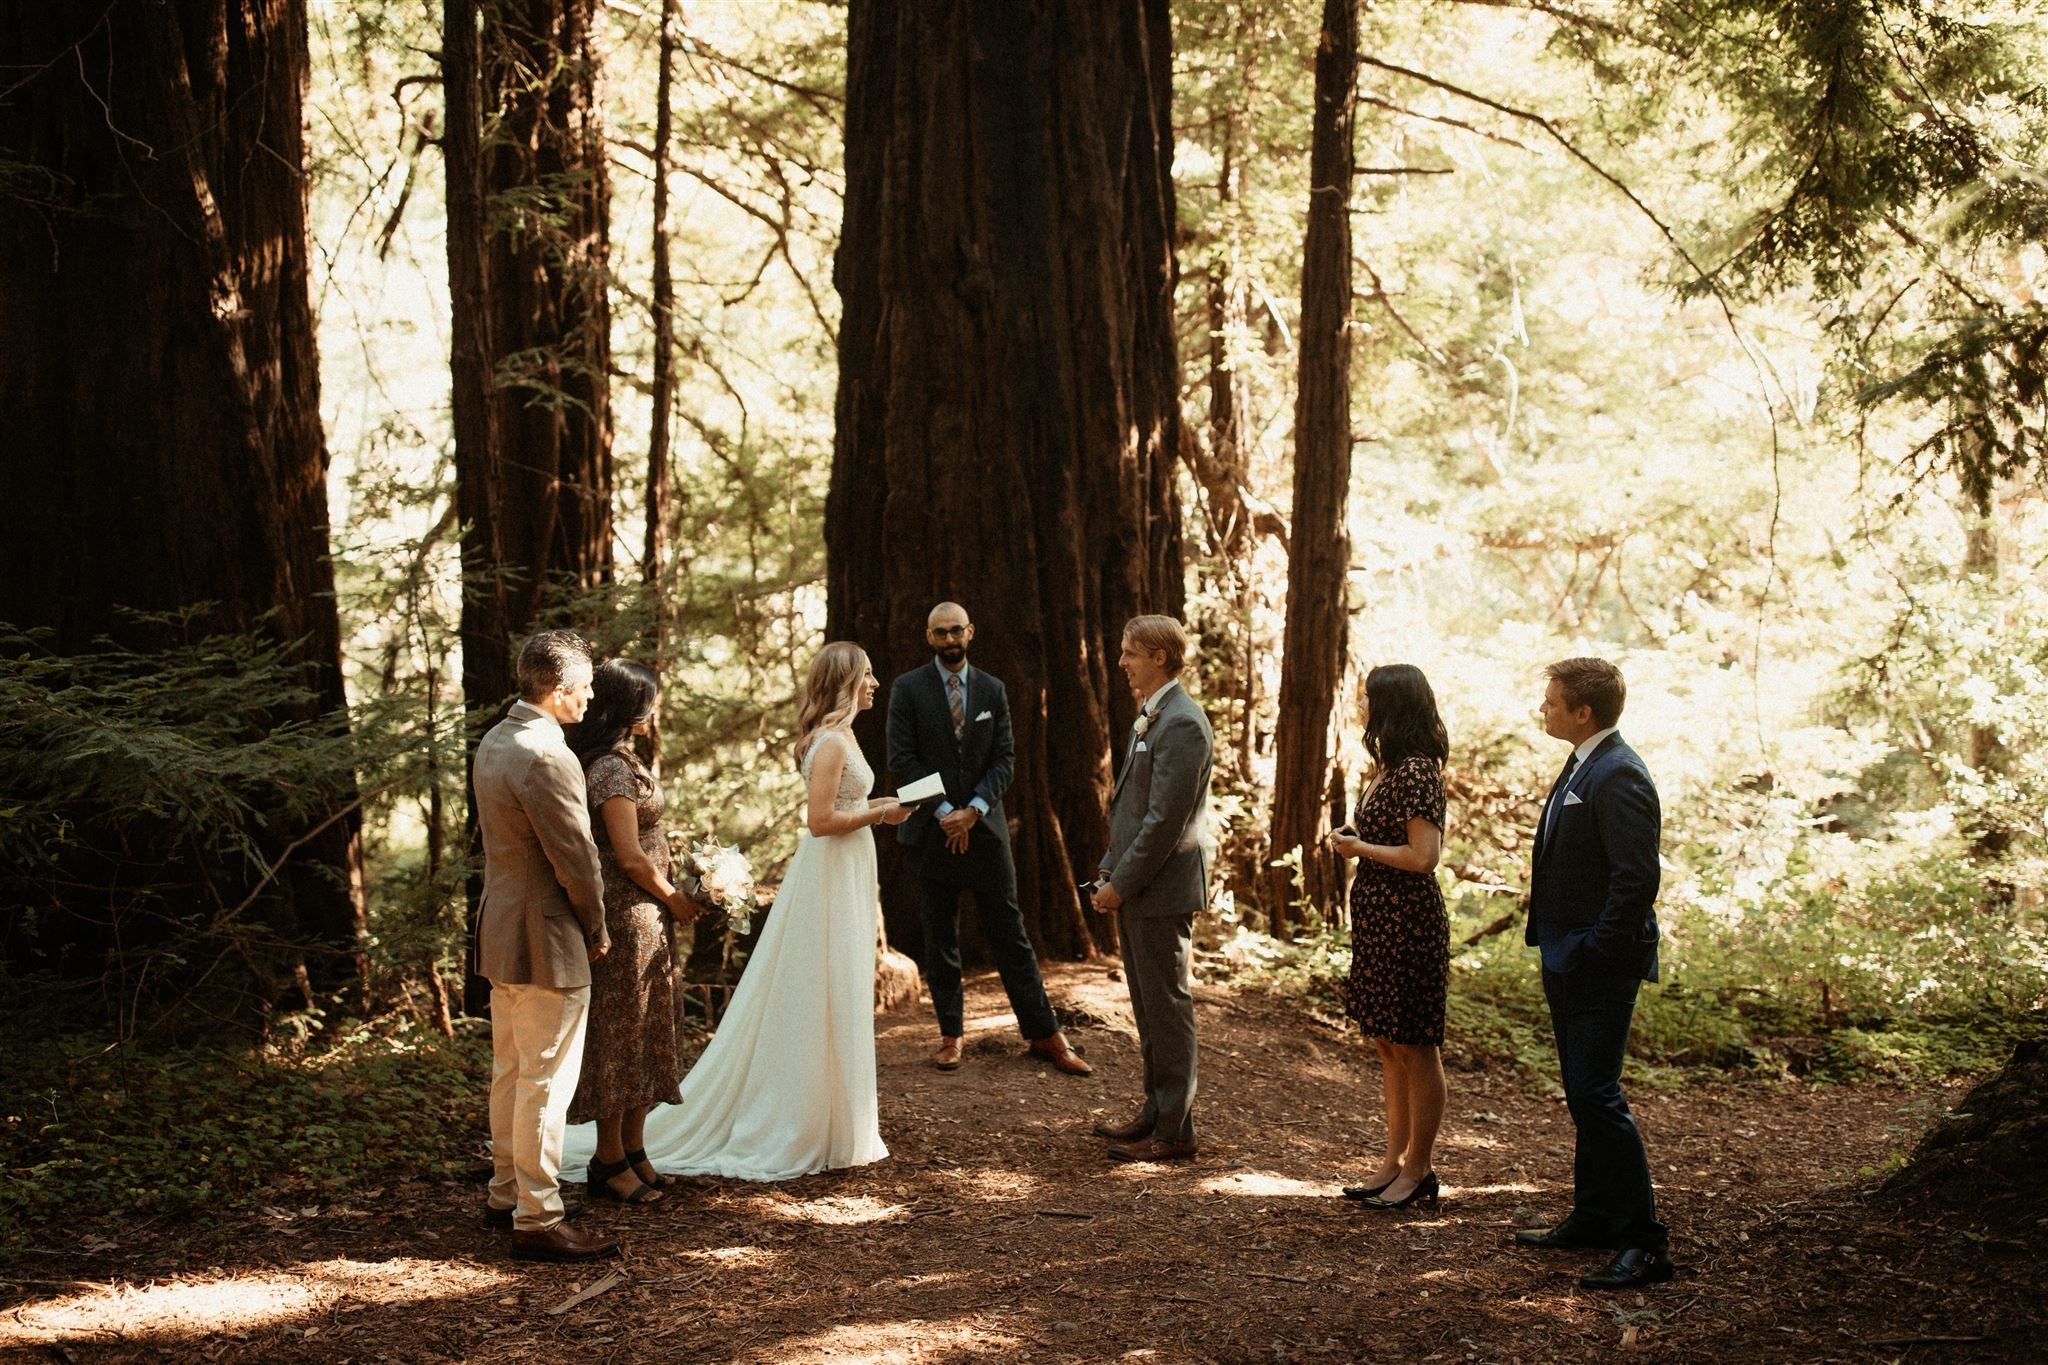 16-How-to-elope-in-Big-Sur-by-Will-Khoury.jpg